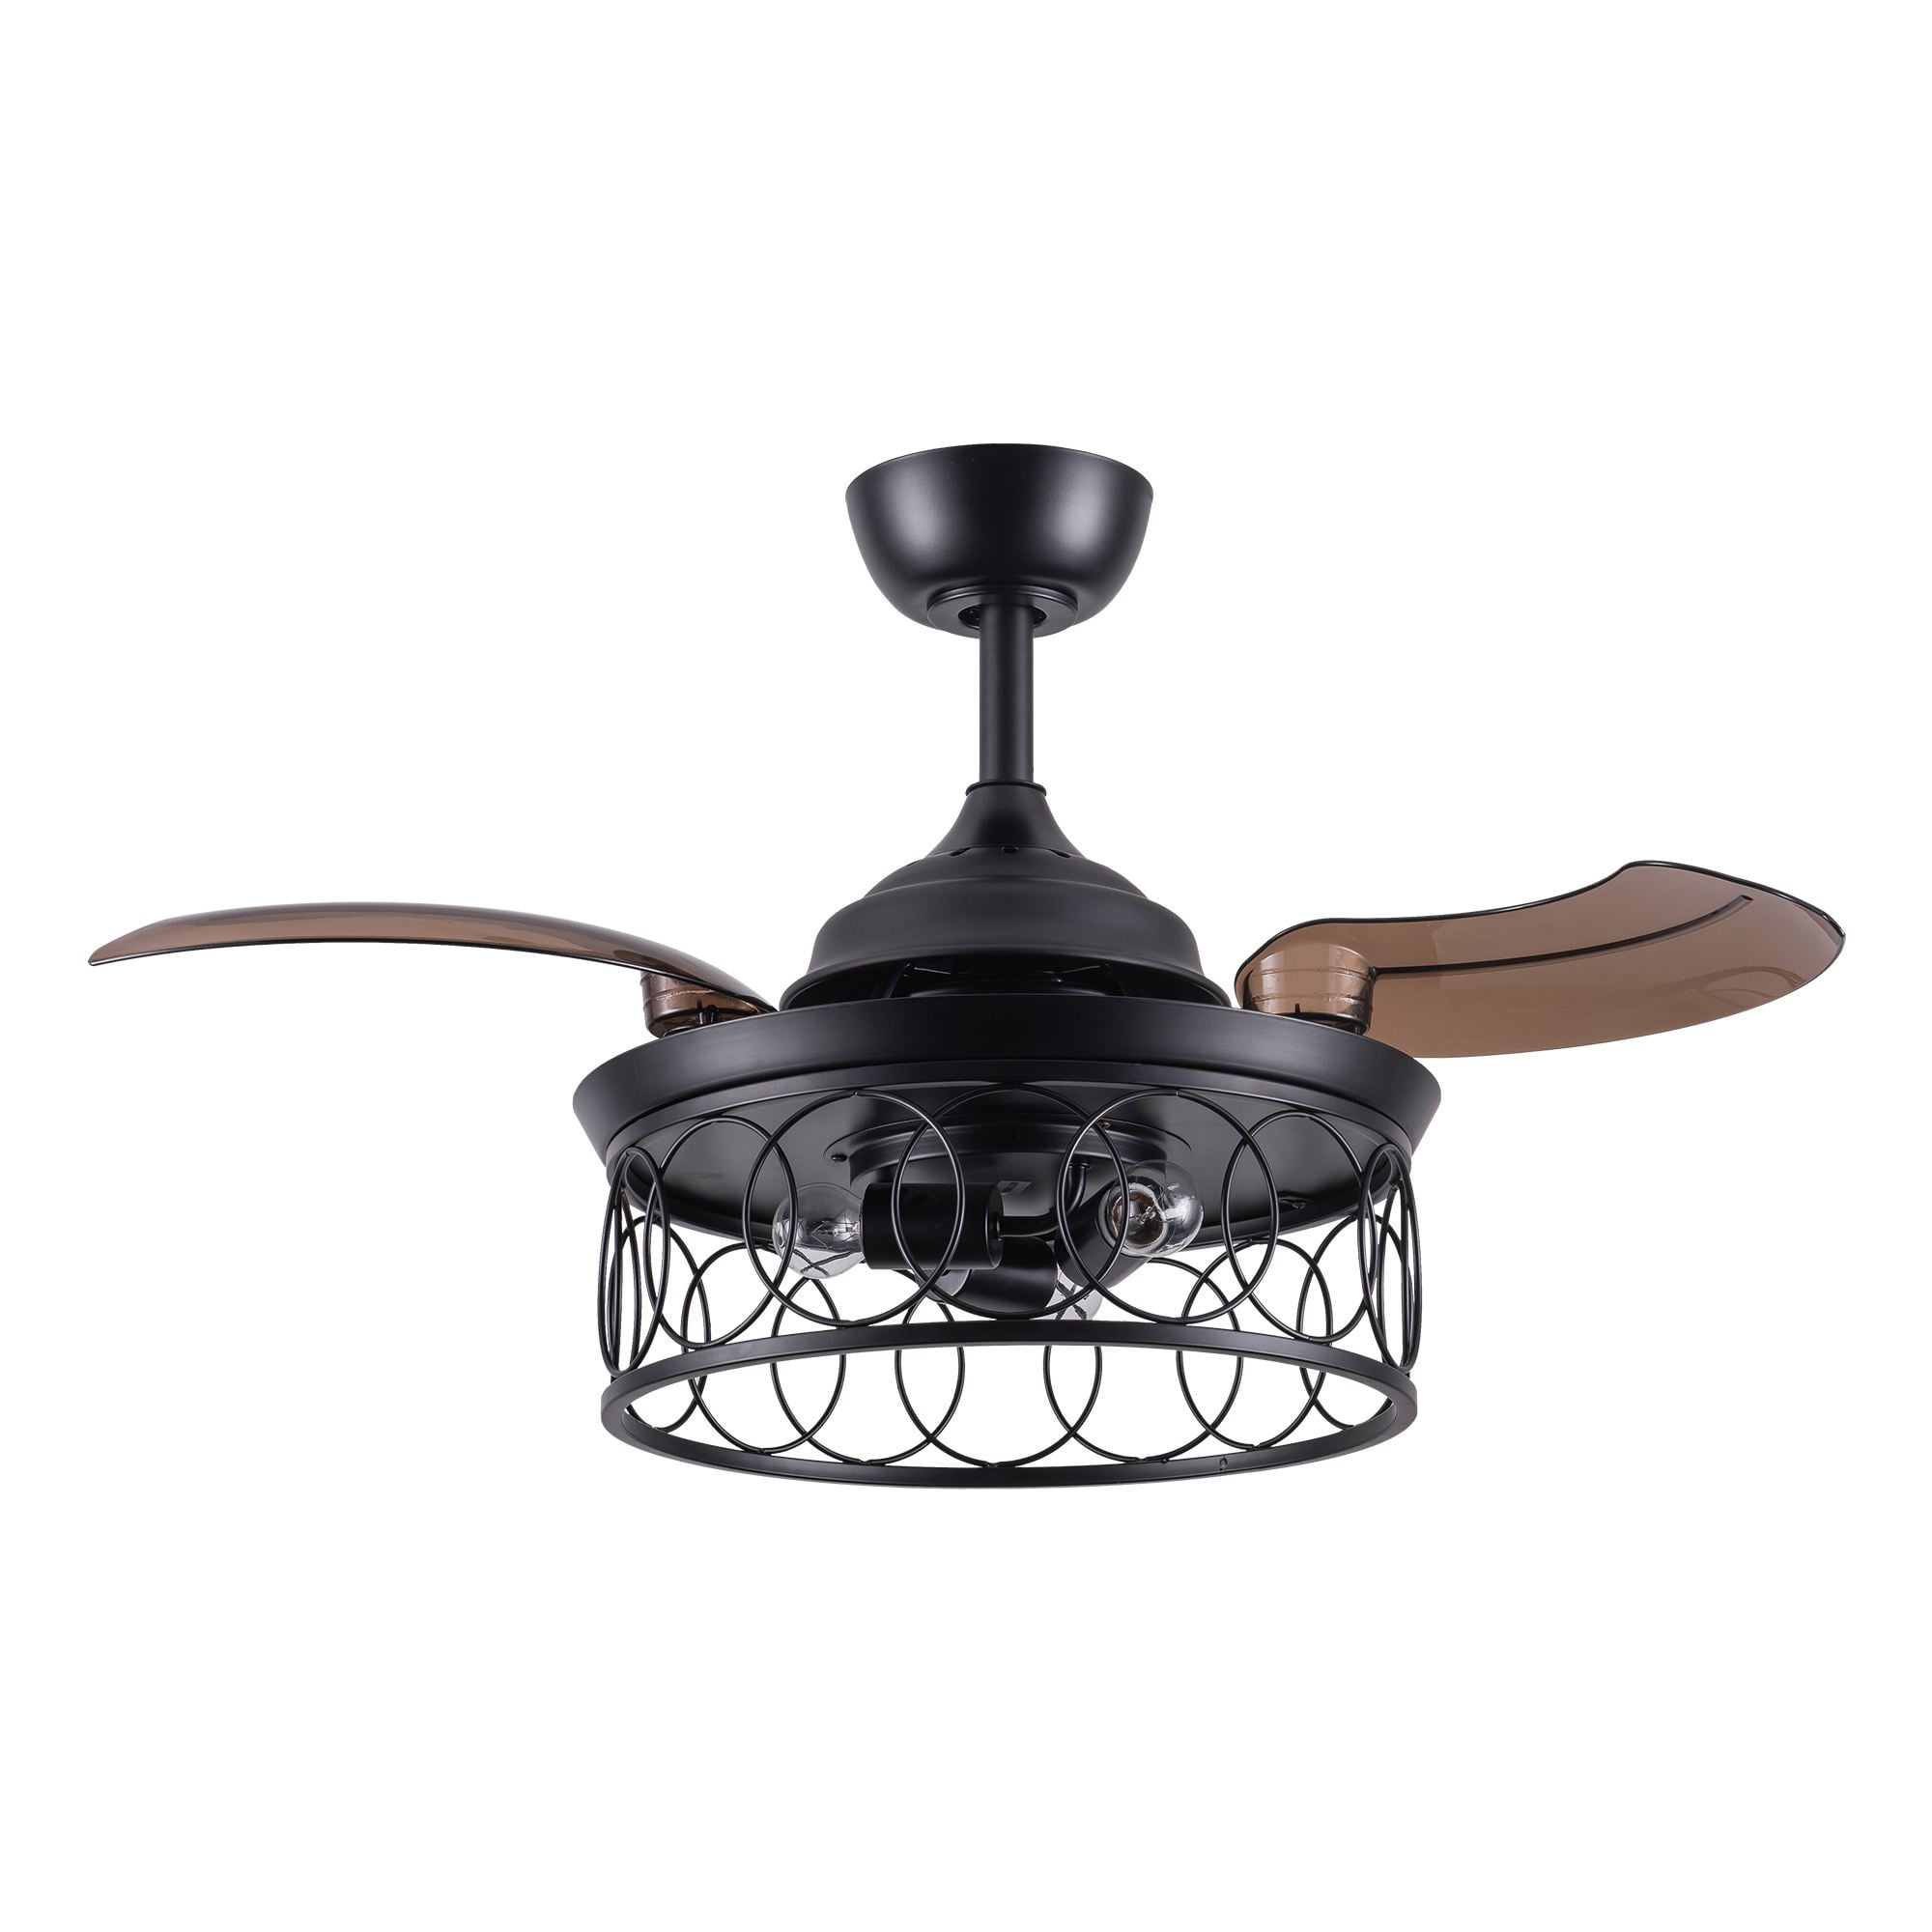 Details about   Industrial Black Metal 34-inch Retractable 3-Blades Ceiling Fan 